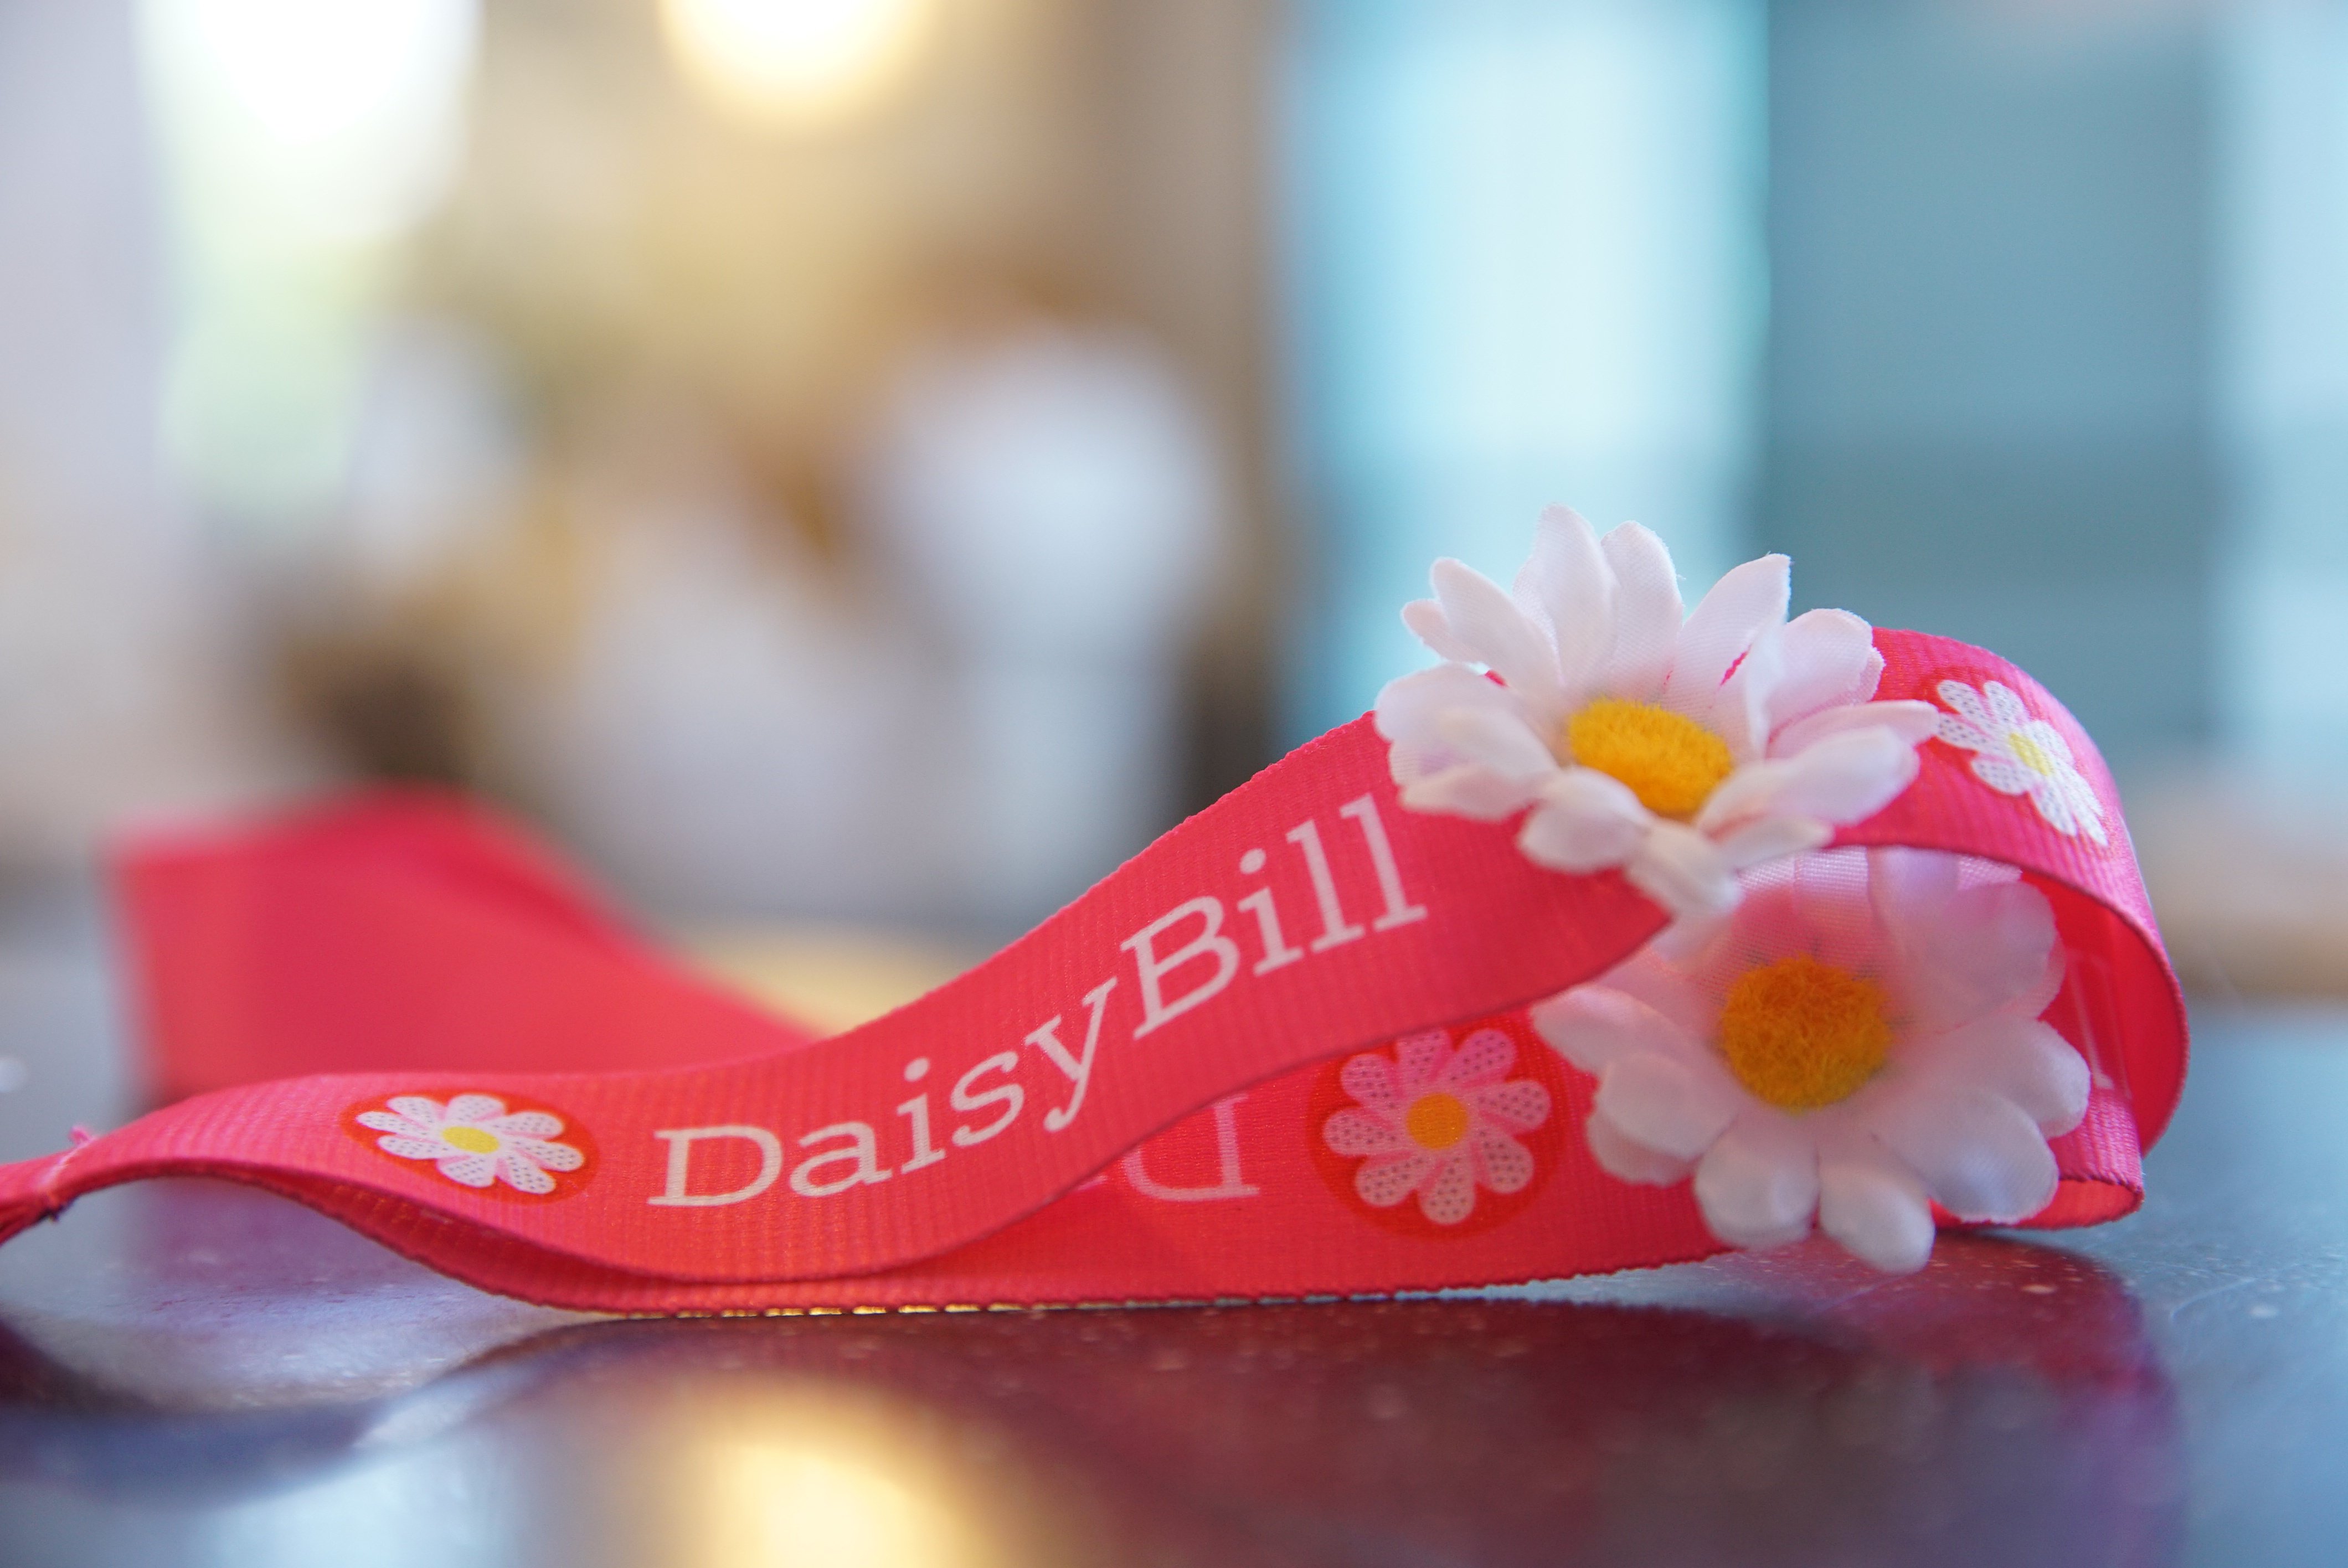 DaisyBillaroo Conference on Workers’ Comp Billing and Payment a Smash!